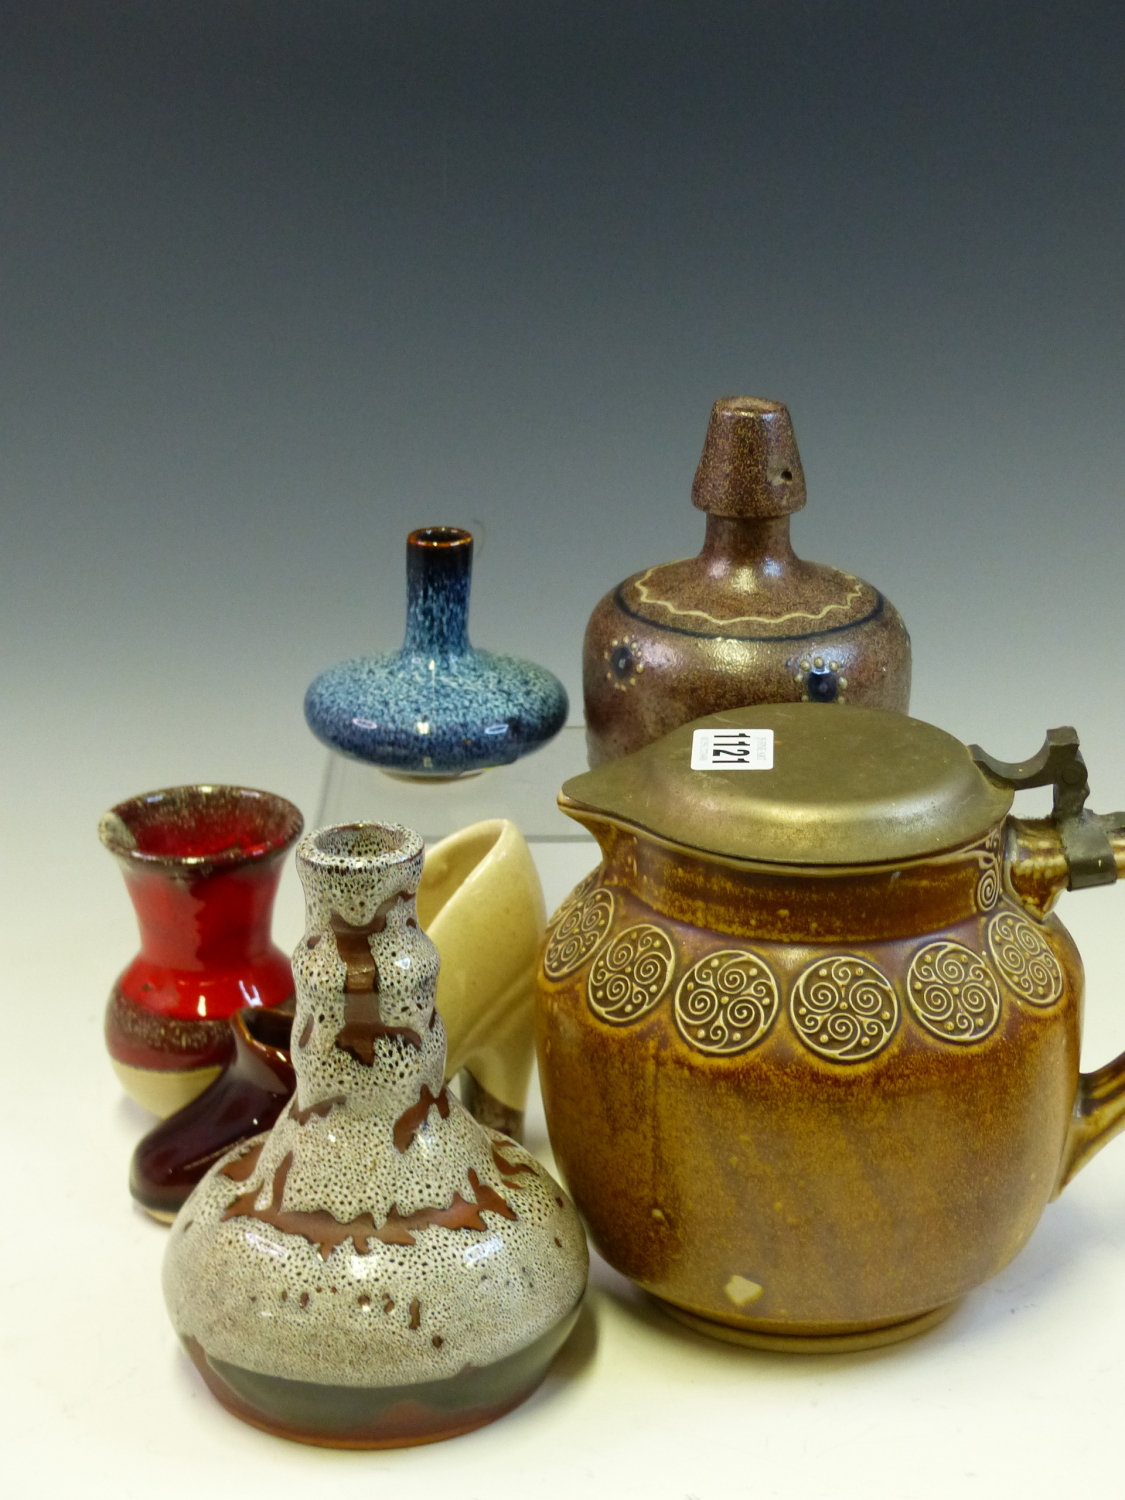 FOUR STUDIO POTTERY VASES, A SHOE AND A MERKELBACH BROWN STONE WARE JUG MOUNTED WITH A METAL LID